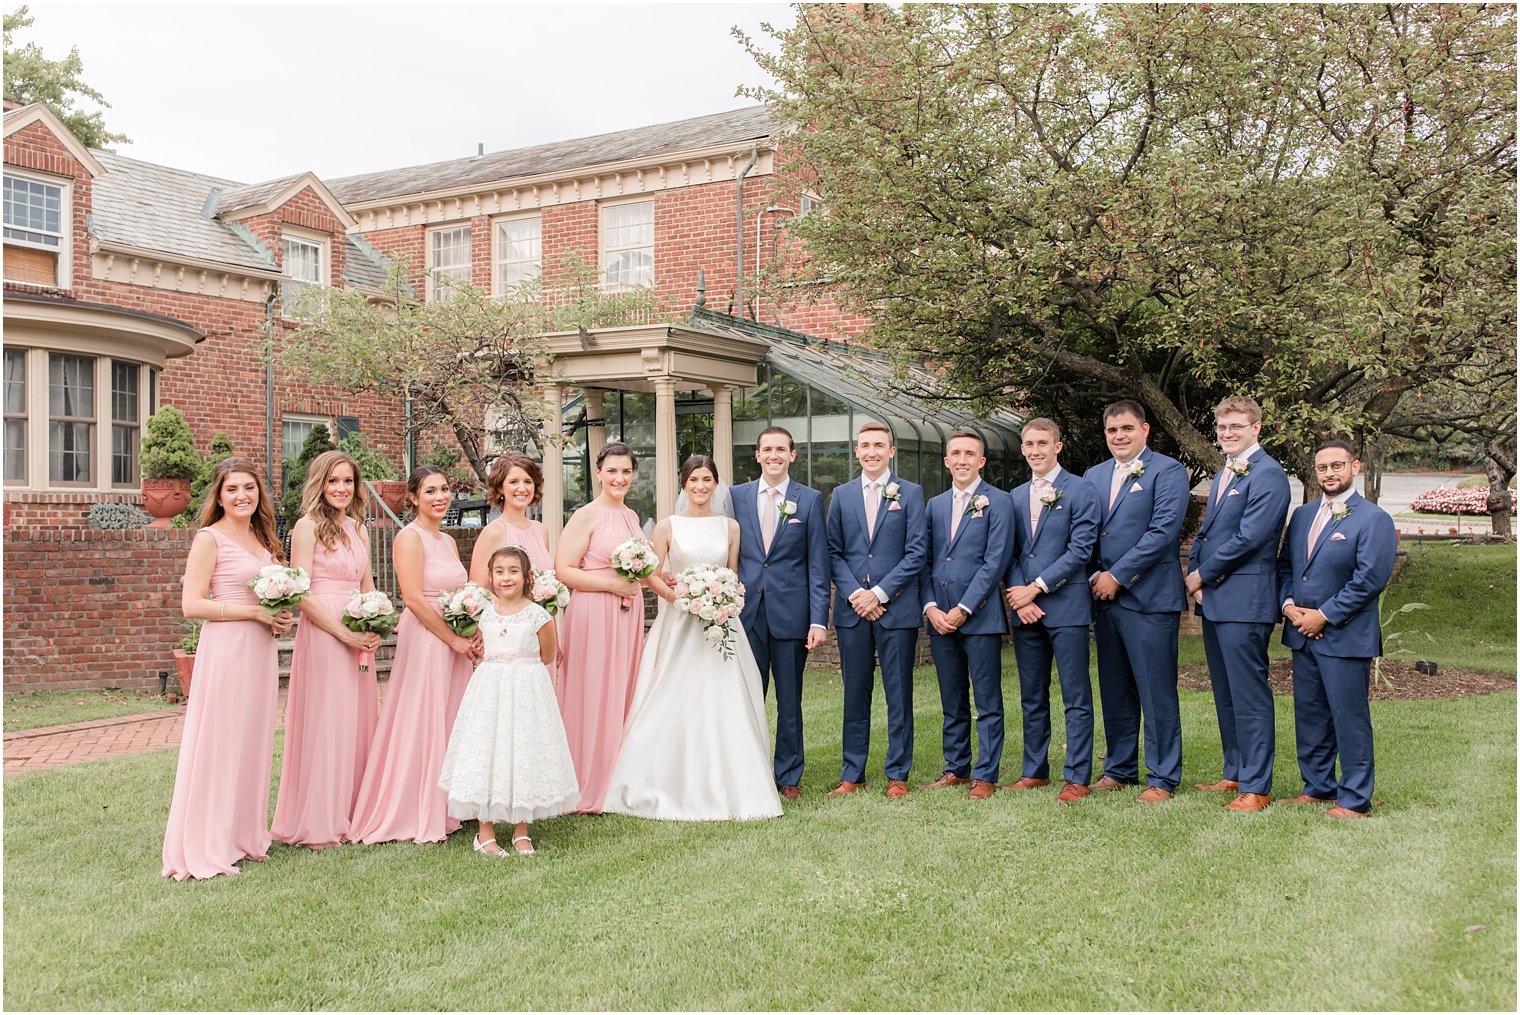 Bridal party photos at The Manor in West Orange NJ